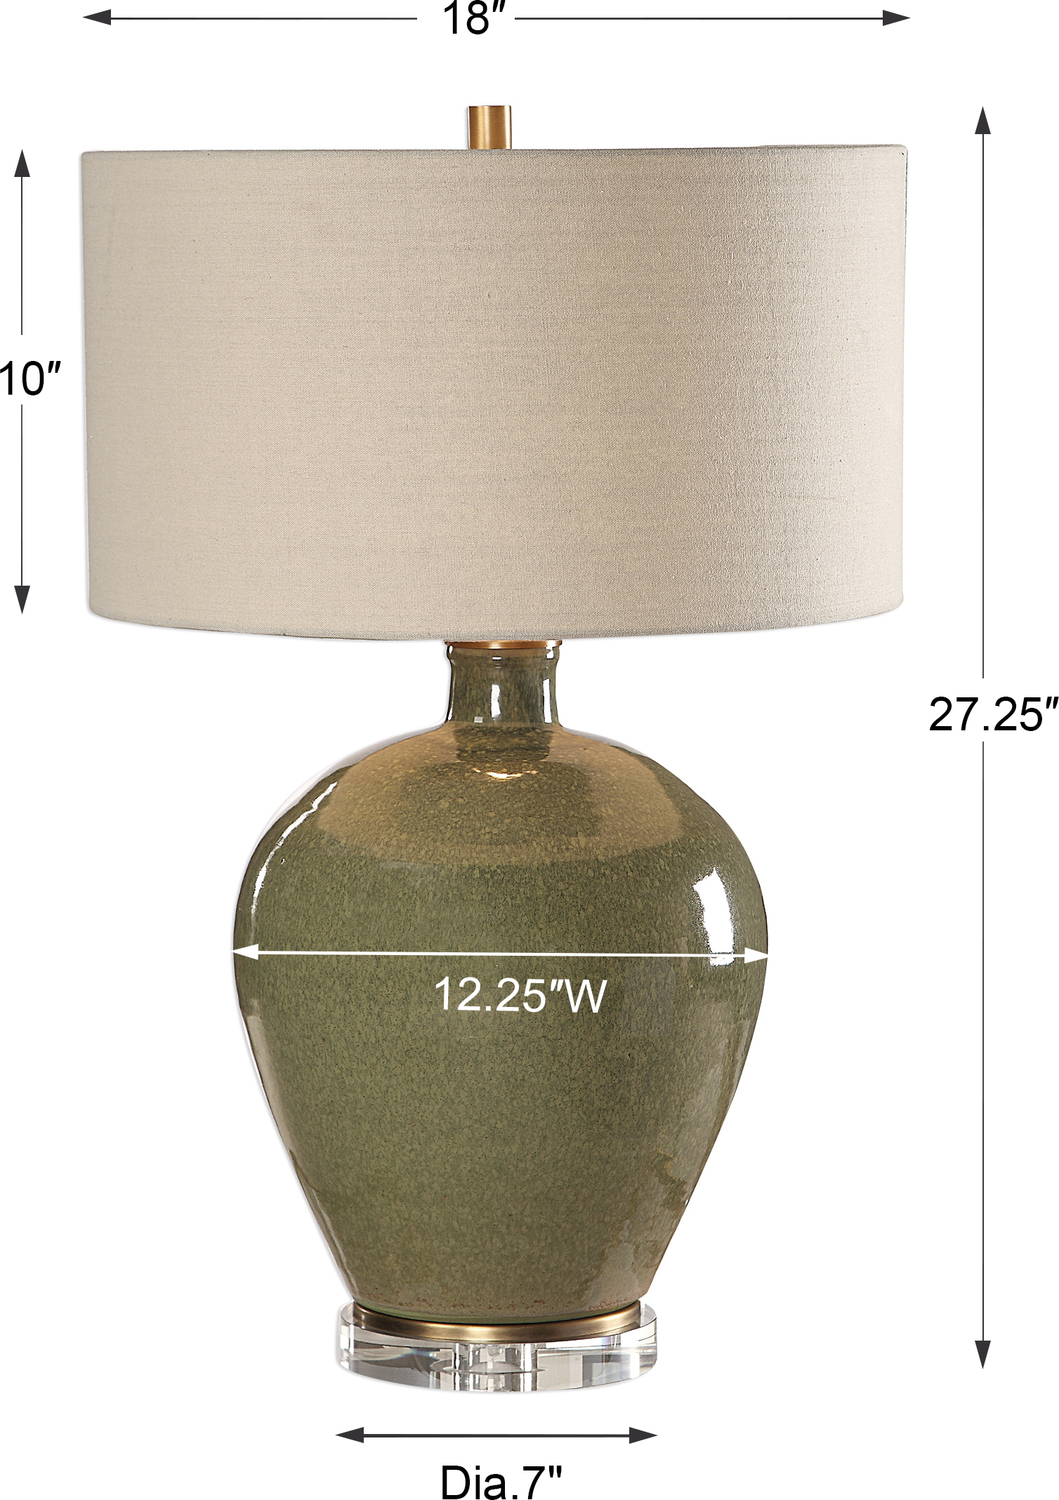 artist desk light Uttermost Table Lamp This Ceramic Base Is Finished In A Distressed Emerald Green Glaze, Accented With Antique Brass Plated Details And A Crystal Foot.